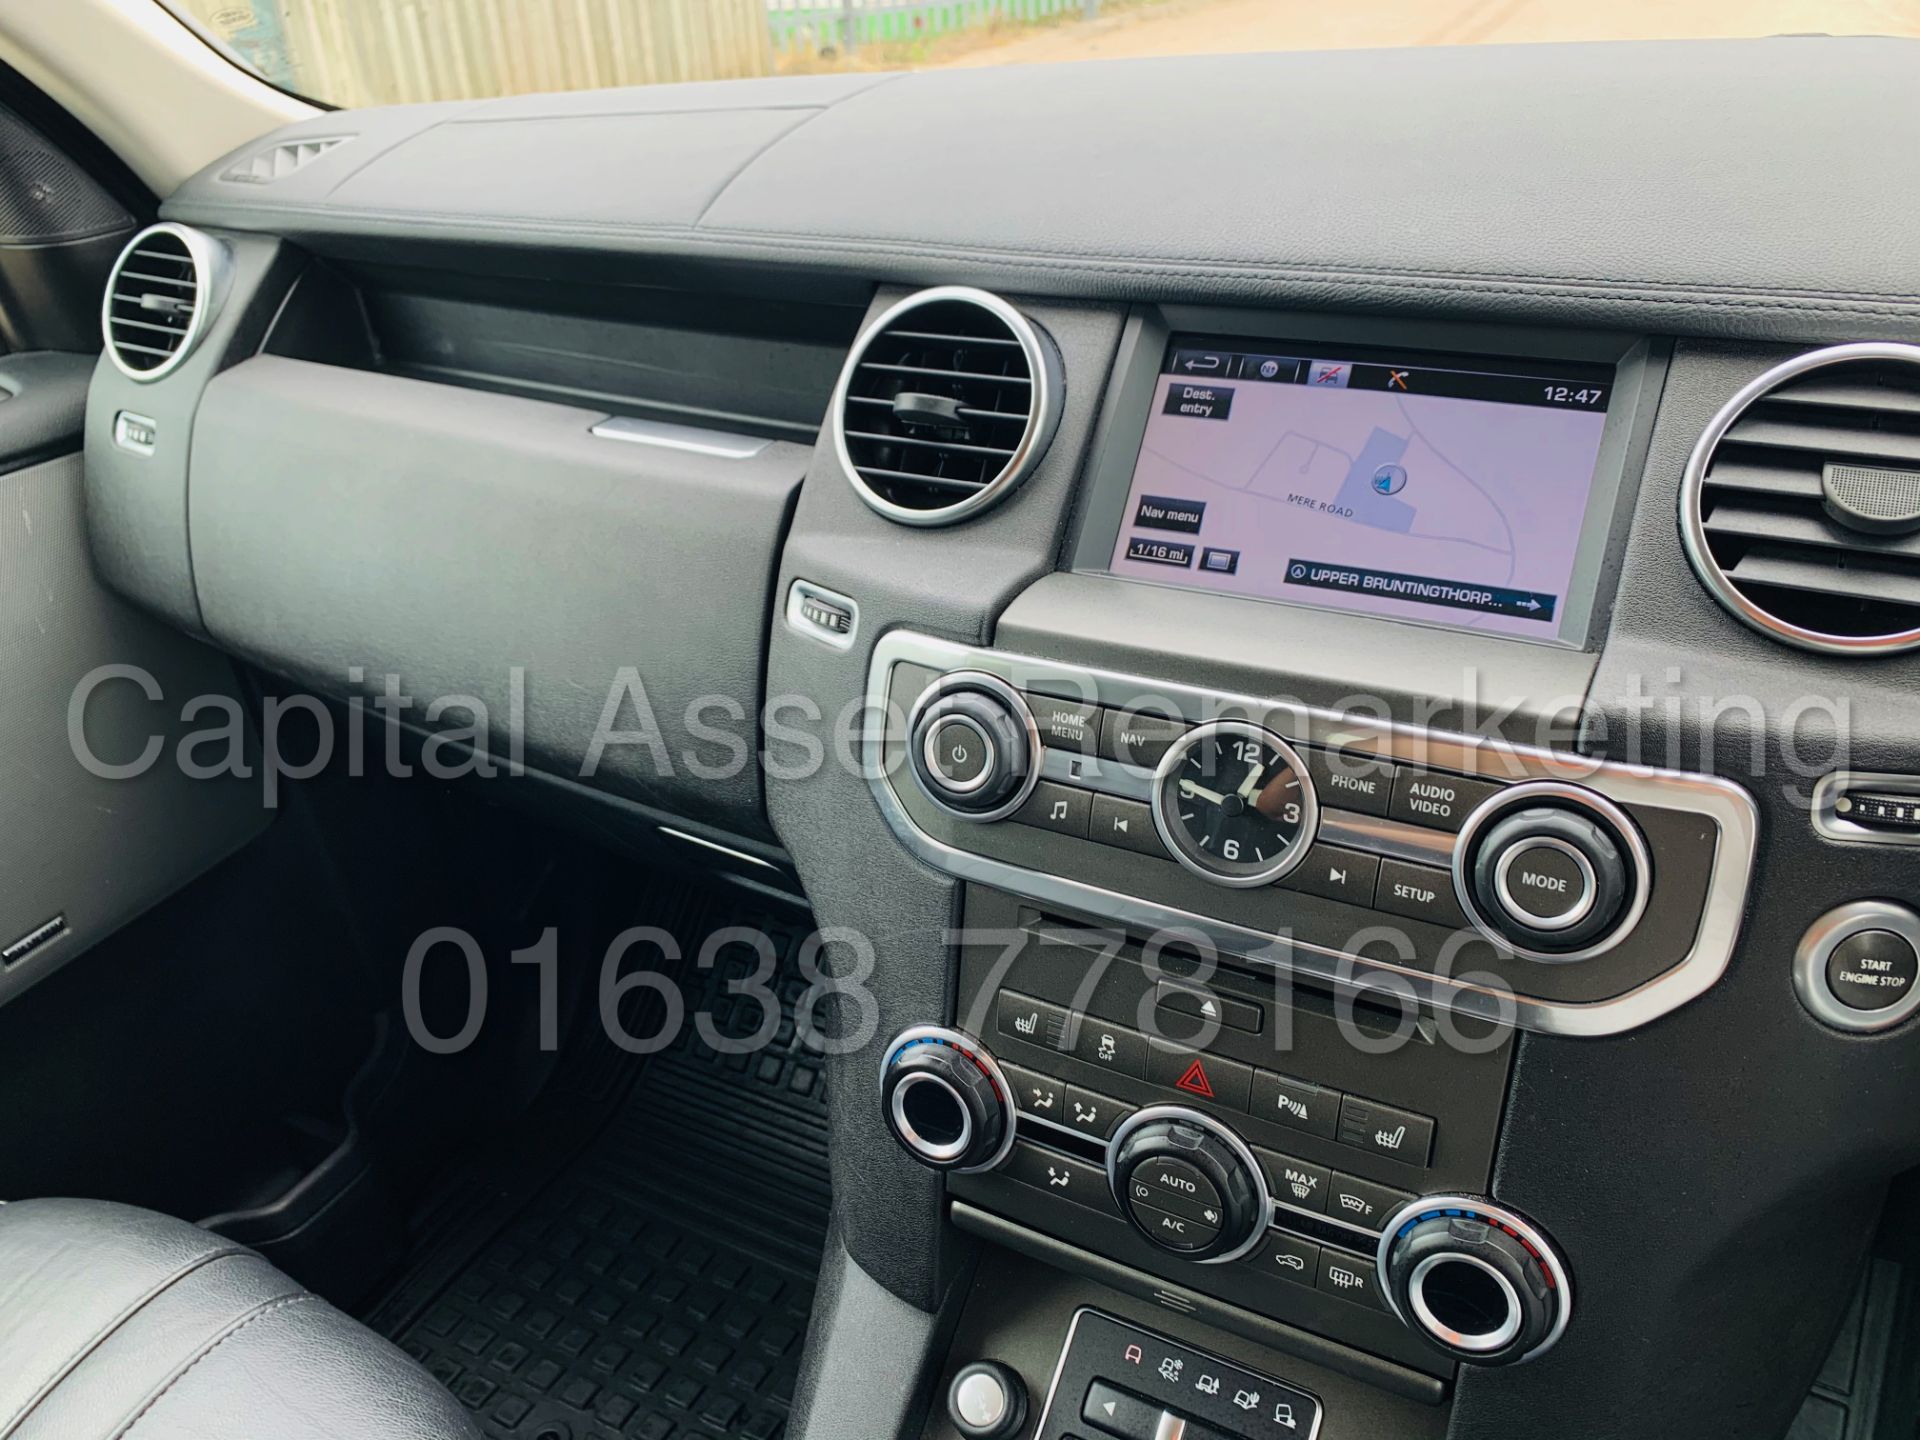 (On Sale) LAND ROVER DISCOVERY 4 *SE TECH* 7 SEATER SUV (2016) '3.0 SDV6 - 8 SPEED AUTO' (1 OWNER) - Image 44 of 53